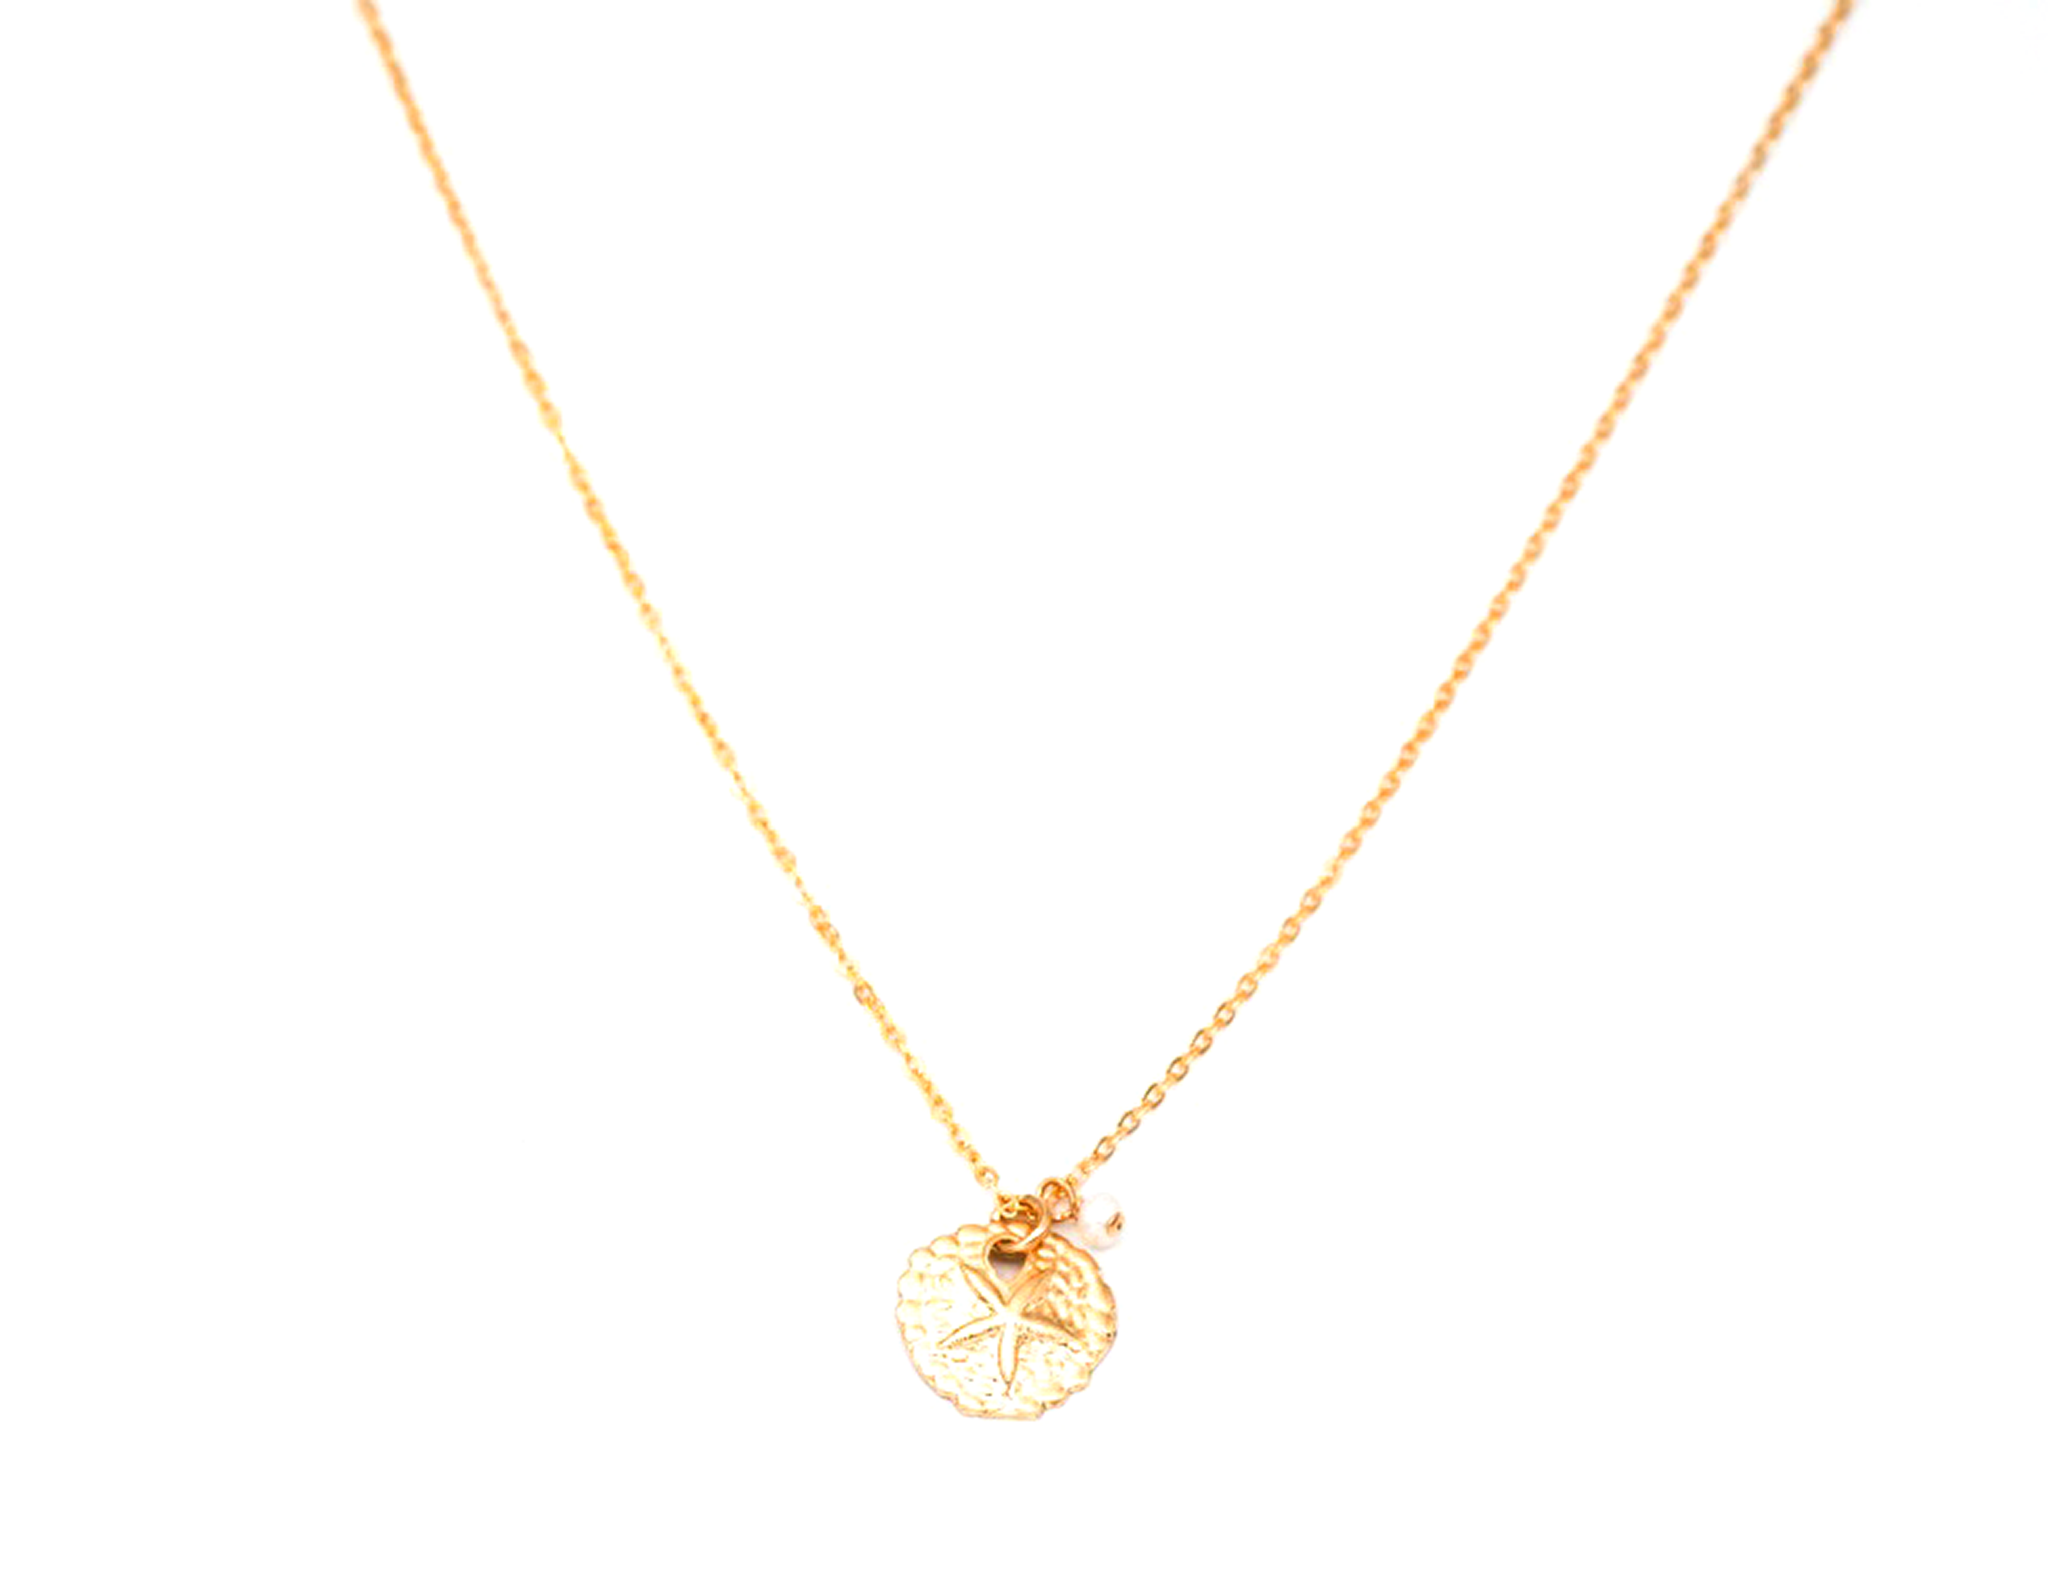 May Martin - Sand Dollar Necklace